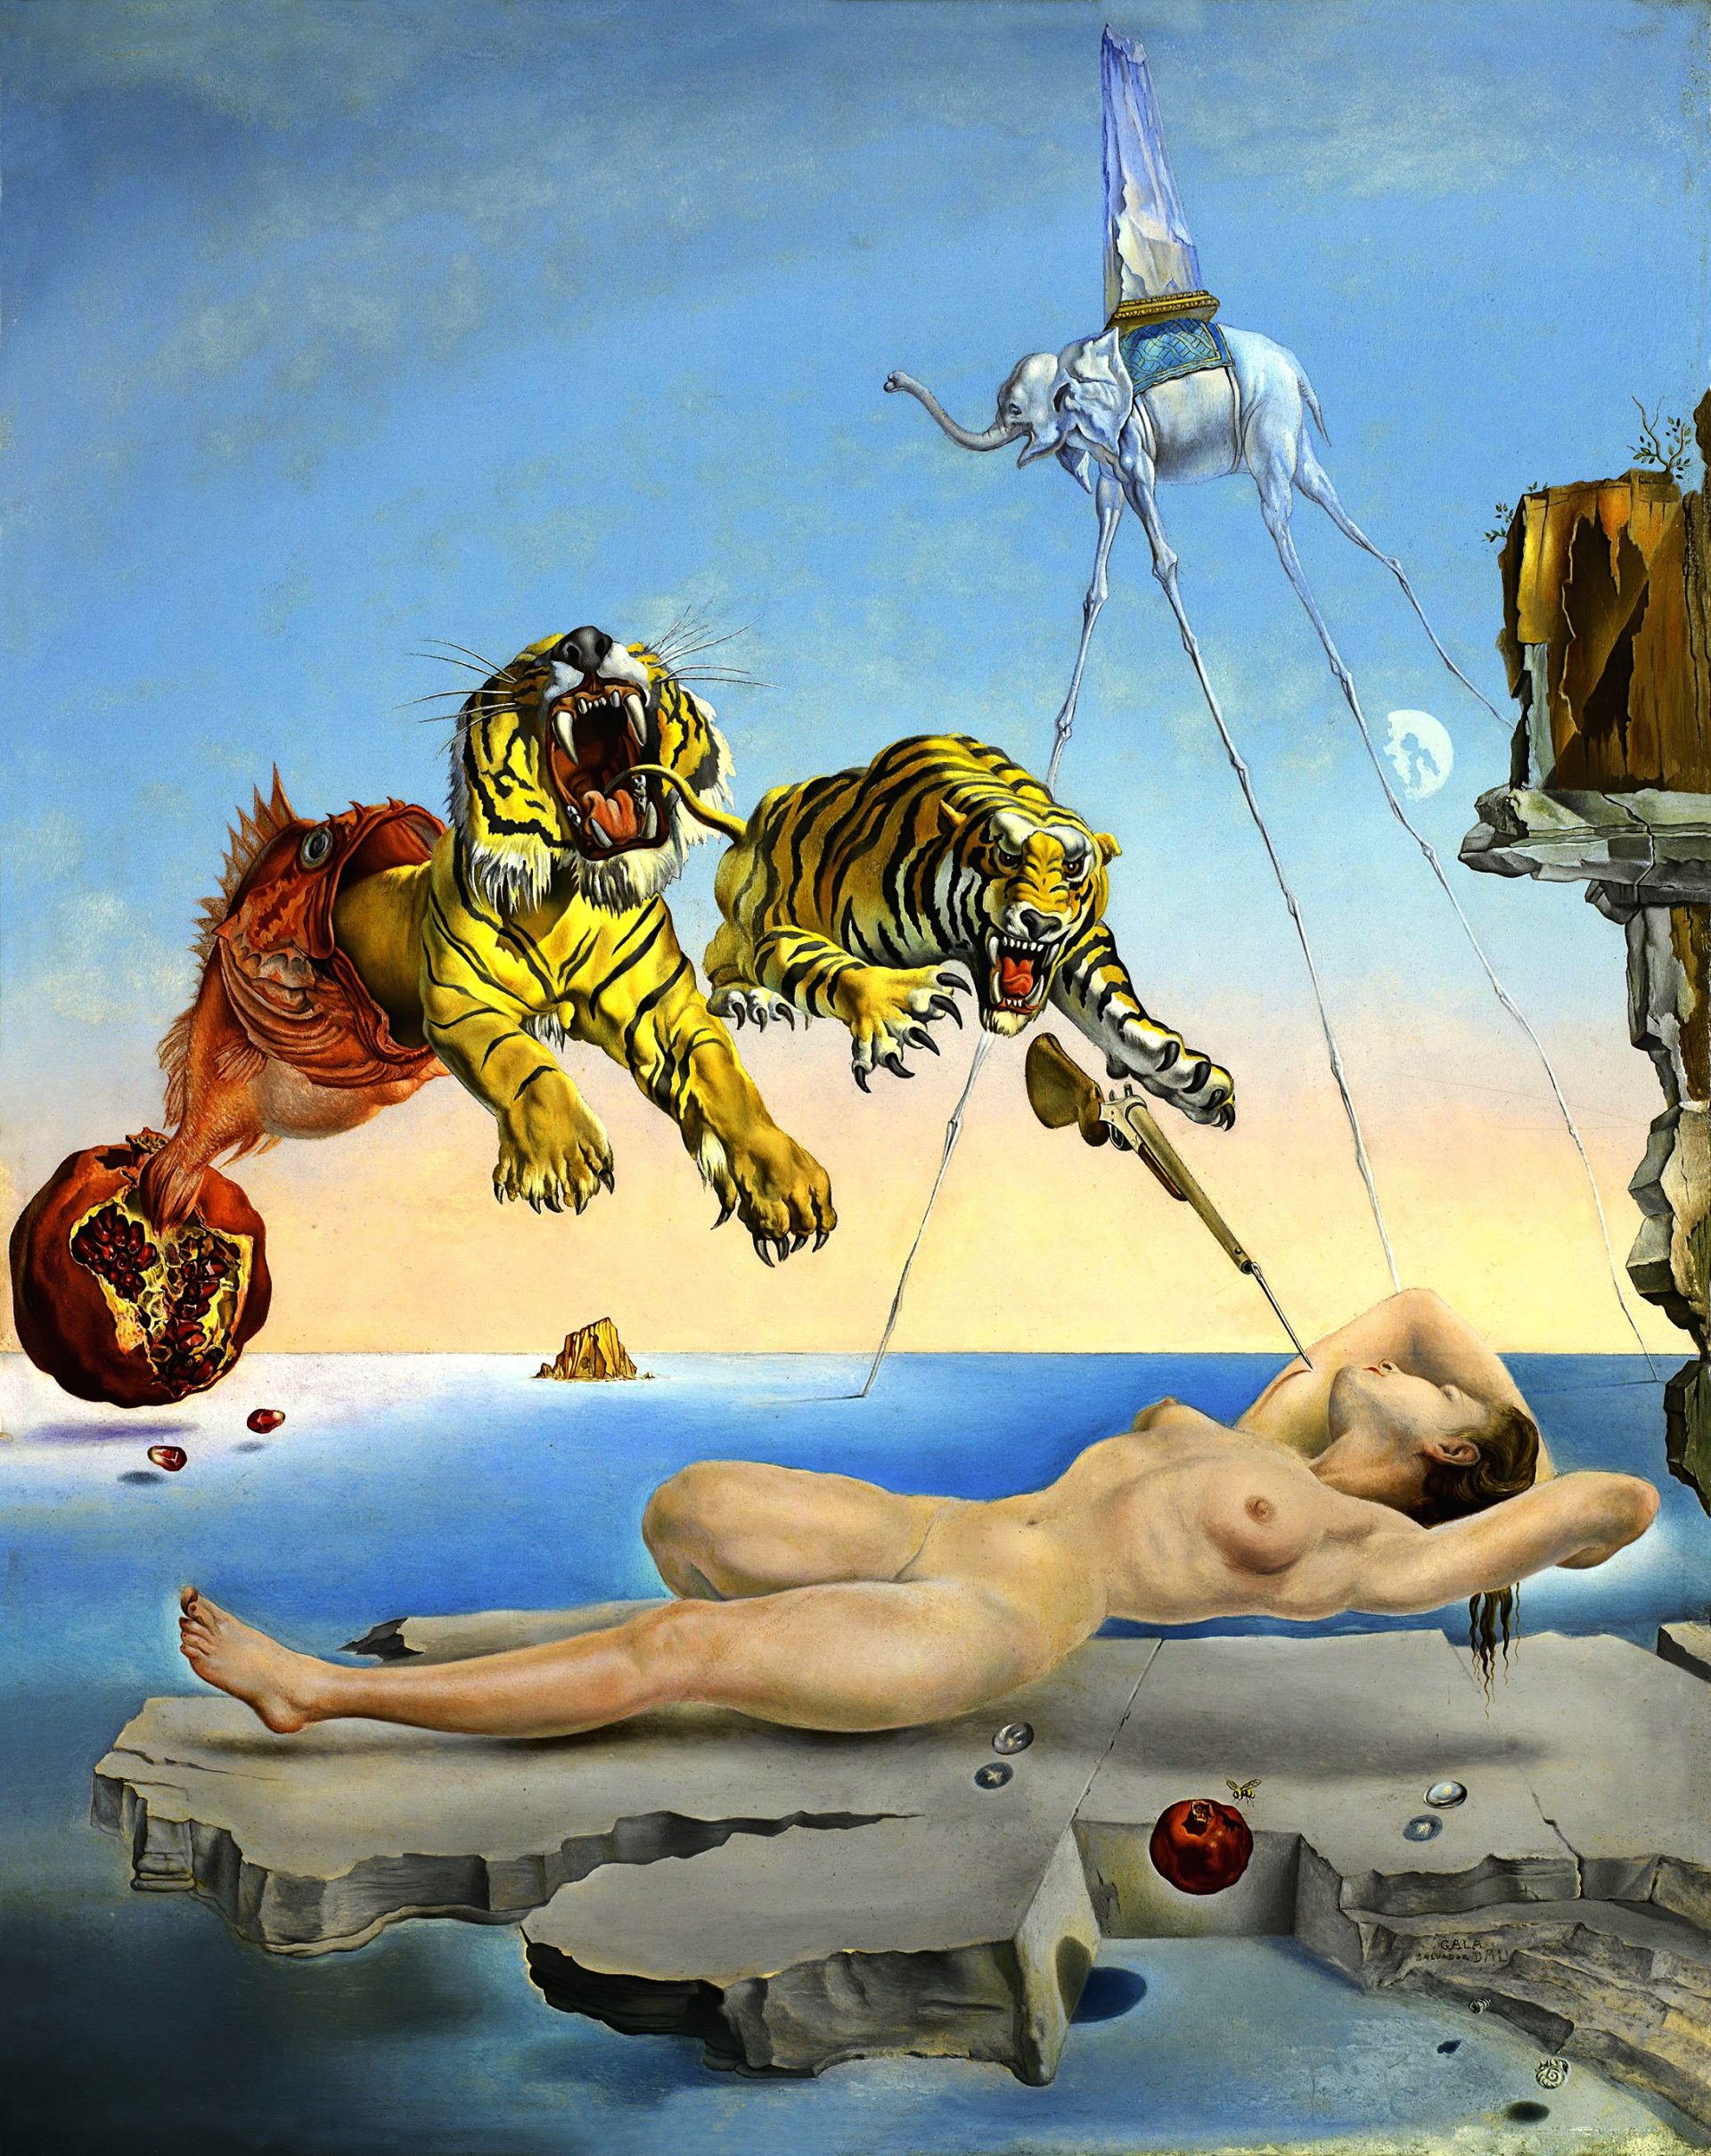 A surreal painting of a woman sleeping on a rock above the sea, surrounded by strange and symbolic objects. A bee flies near a pomegranate, which bursts open to reveal a fish, which spits out two tigers and a bayonet. The bayonet is about to prick the woman’s arm, while the tigers leap towards her. Above them, an elephant with long legs carries an obelisk on its back. The painting represents the woman’s dream, influenced by Freudian psychoanalysis.